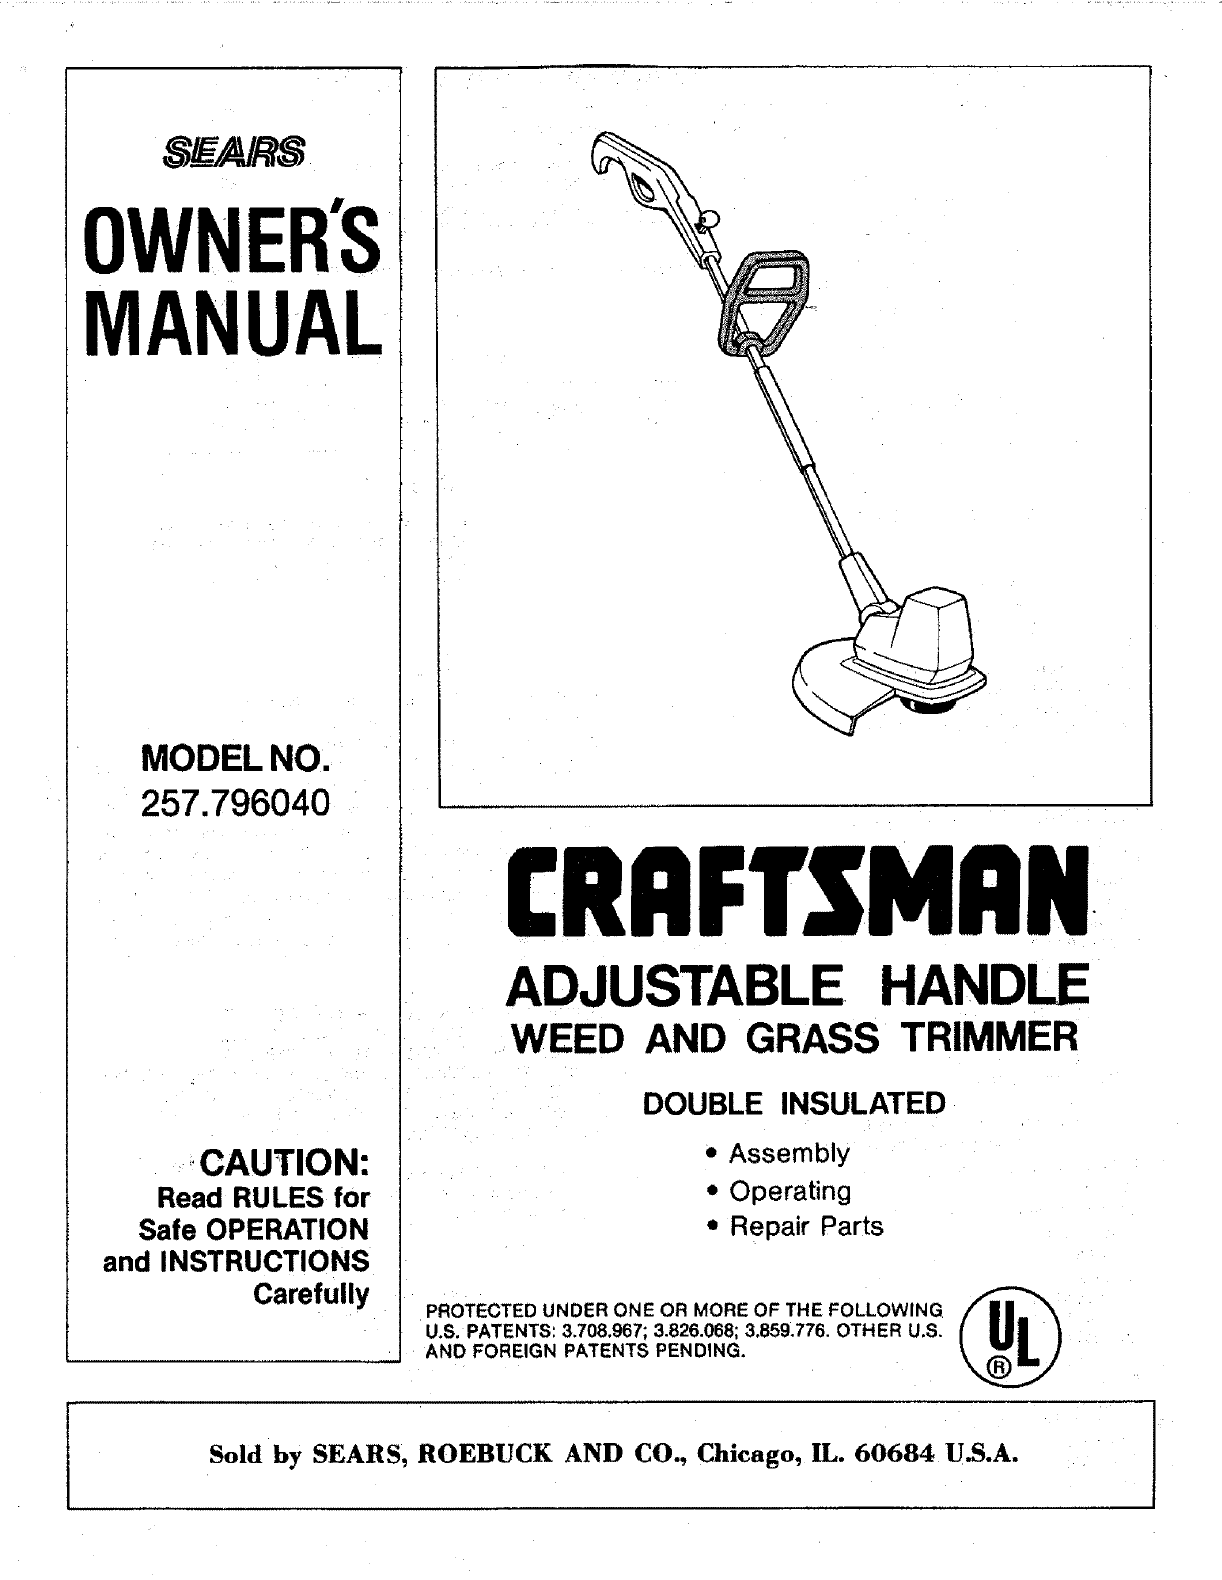 Craftsman 257796040 User Manual Weed And Grass Trimmer Manuals Guides L0707274